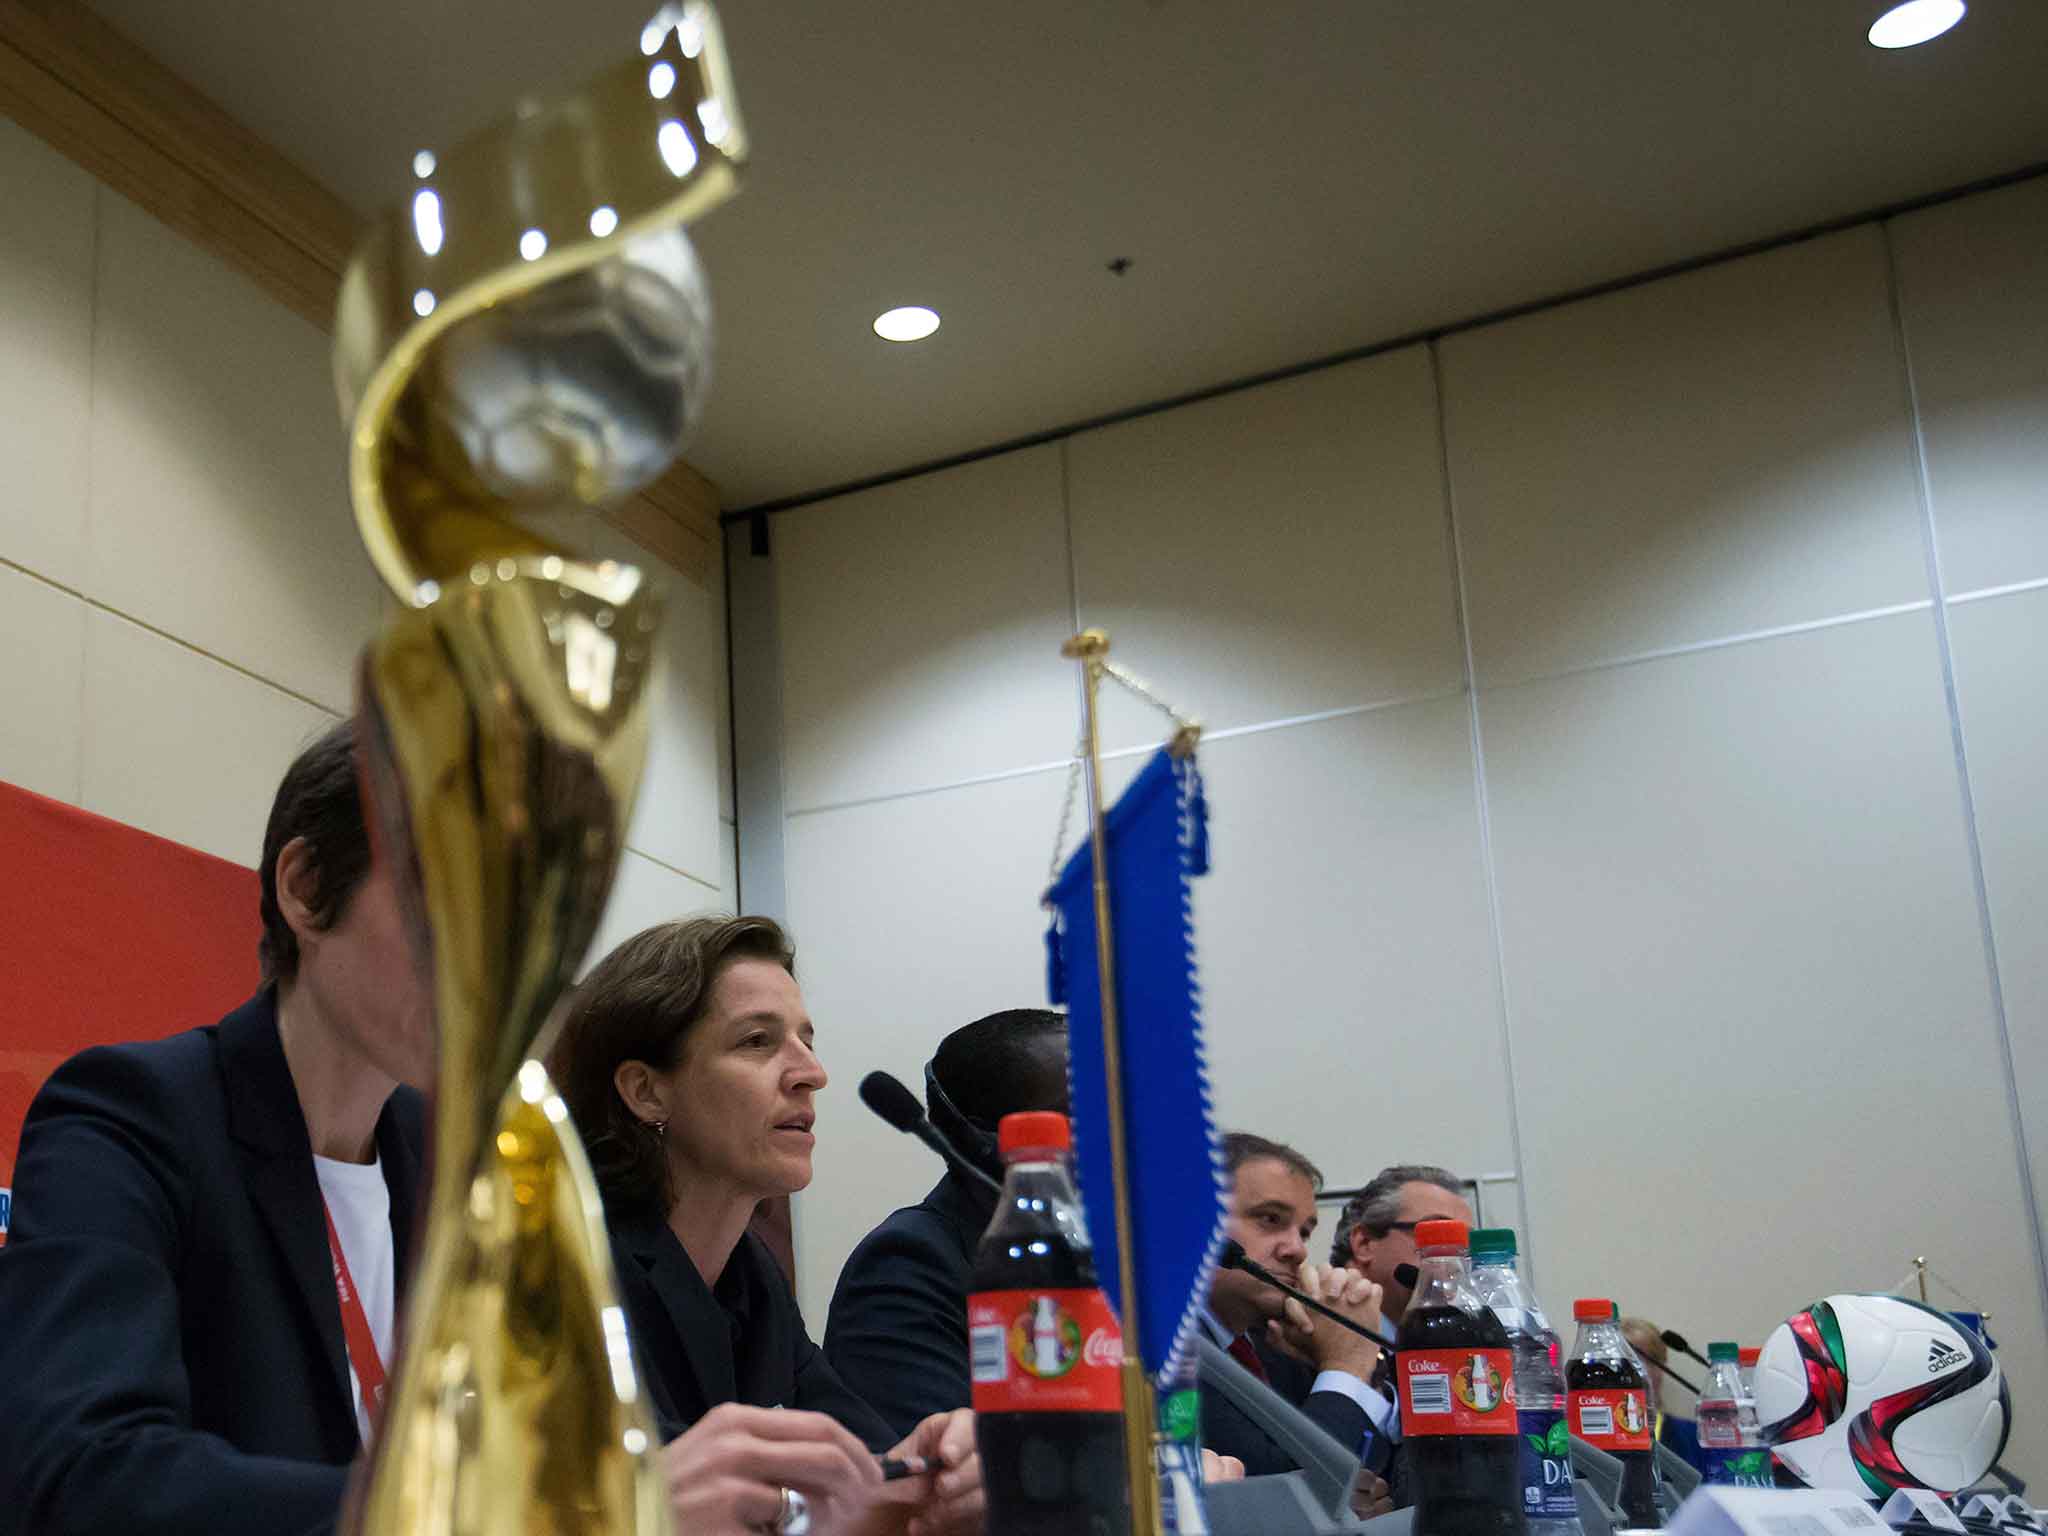 Officials at the Fifa Women's World Cup opening press conference